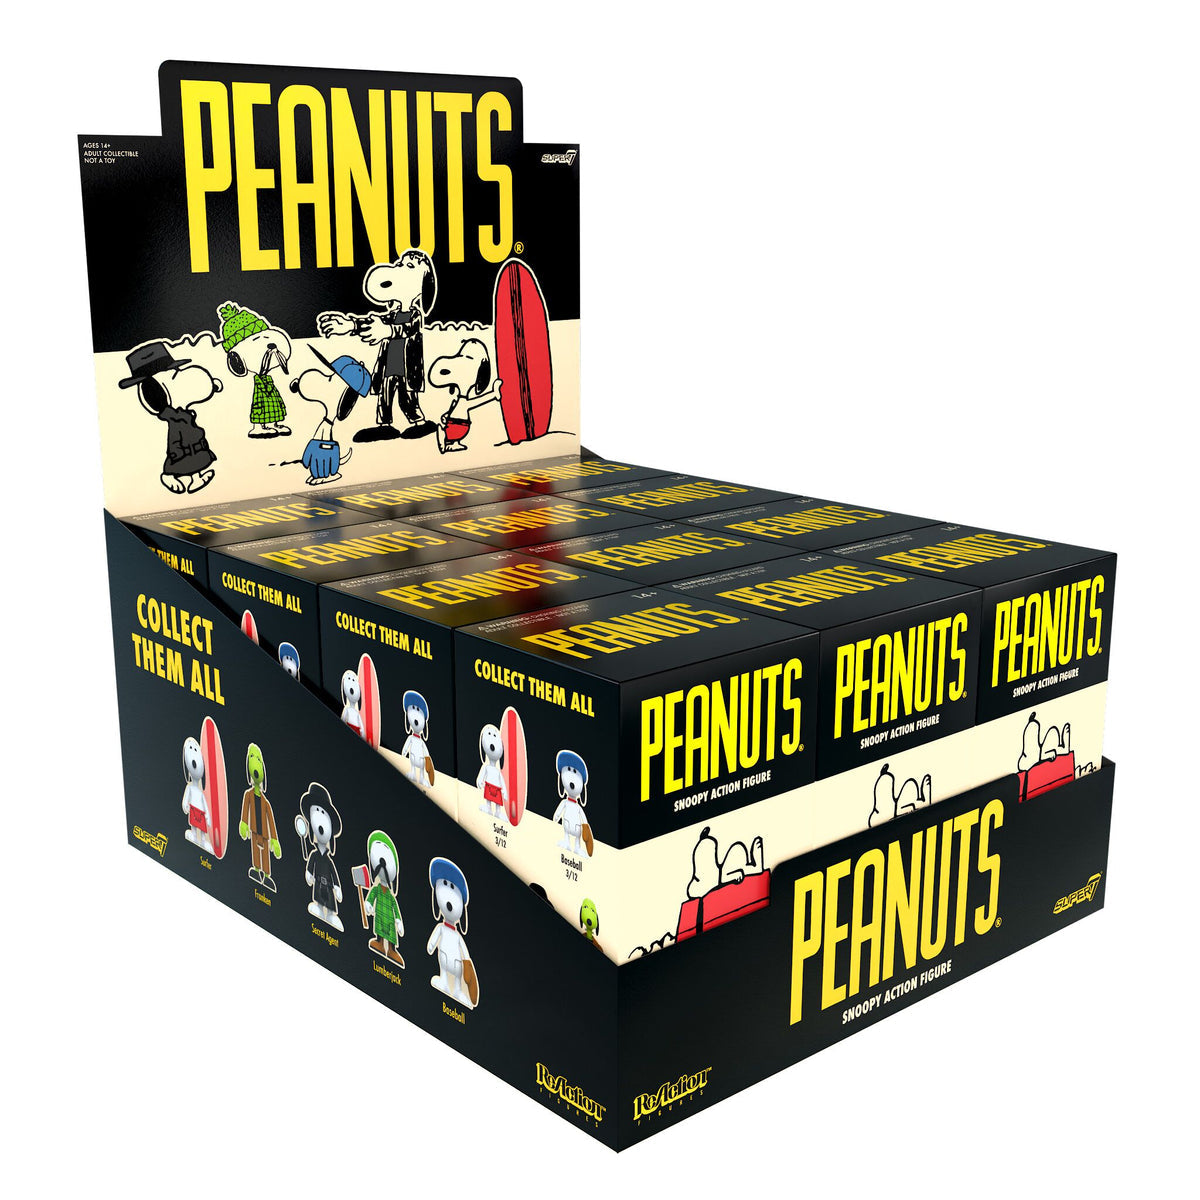 Peanuts Snoopy Blind Box by Super7 (1 BLIND BOX)